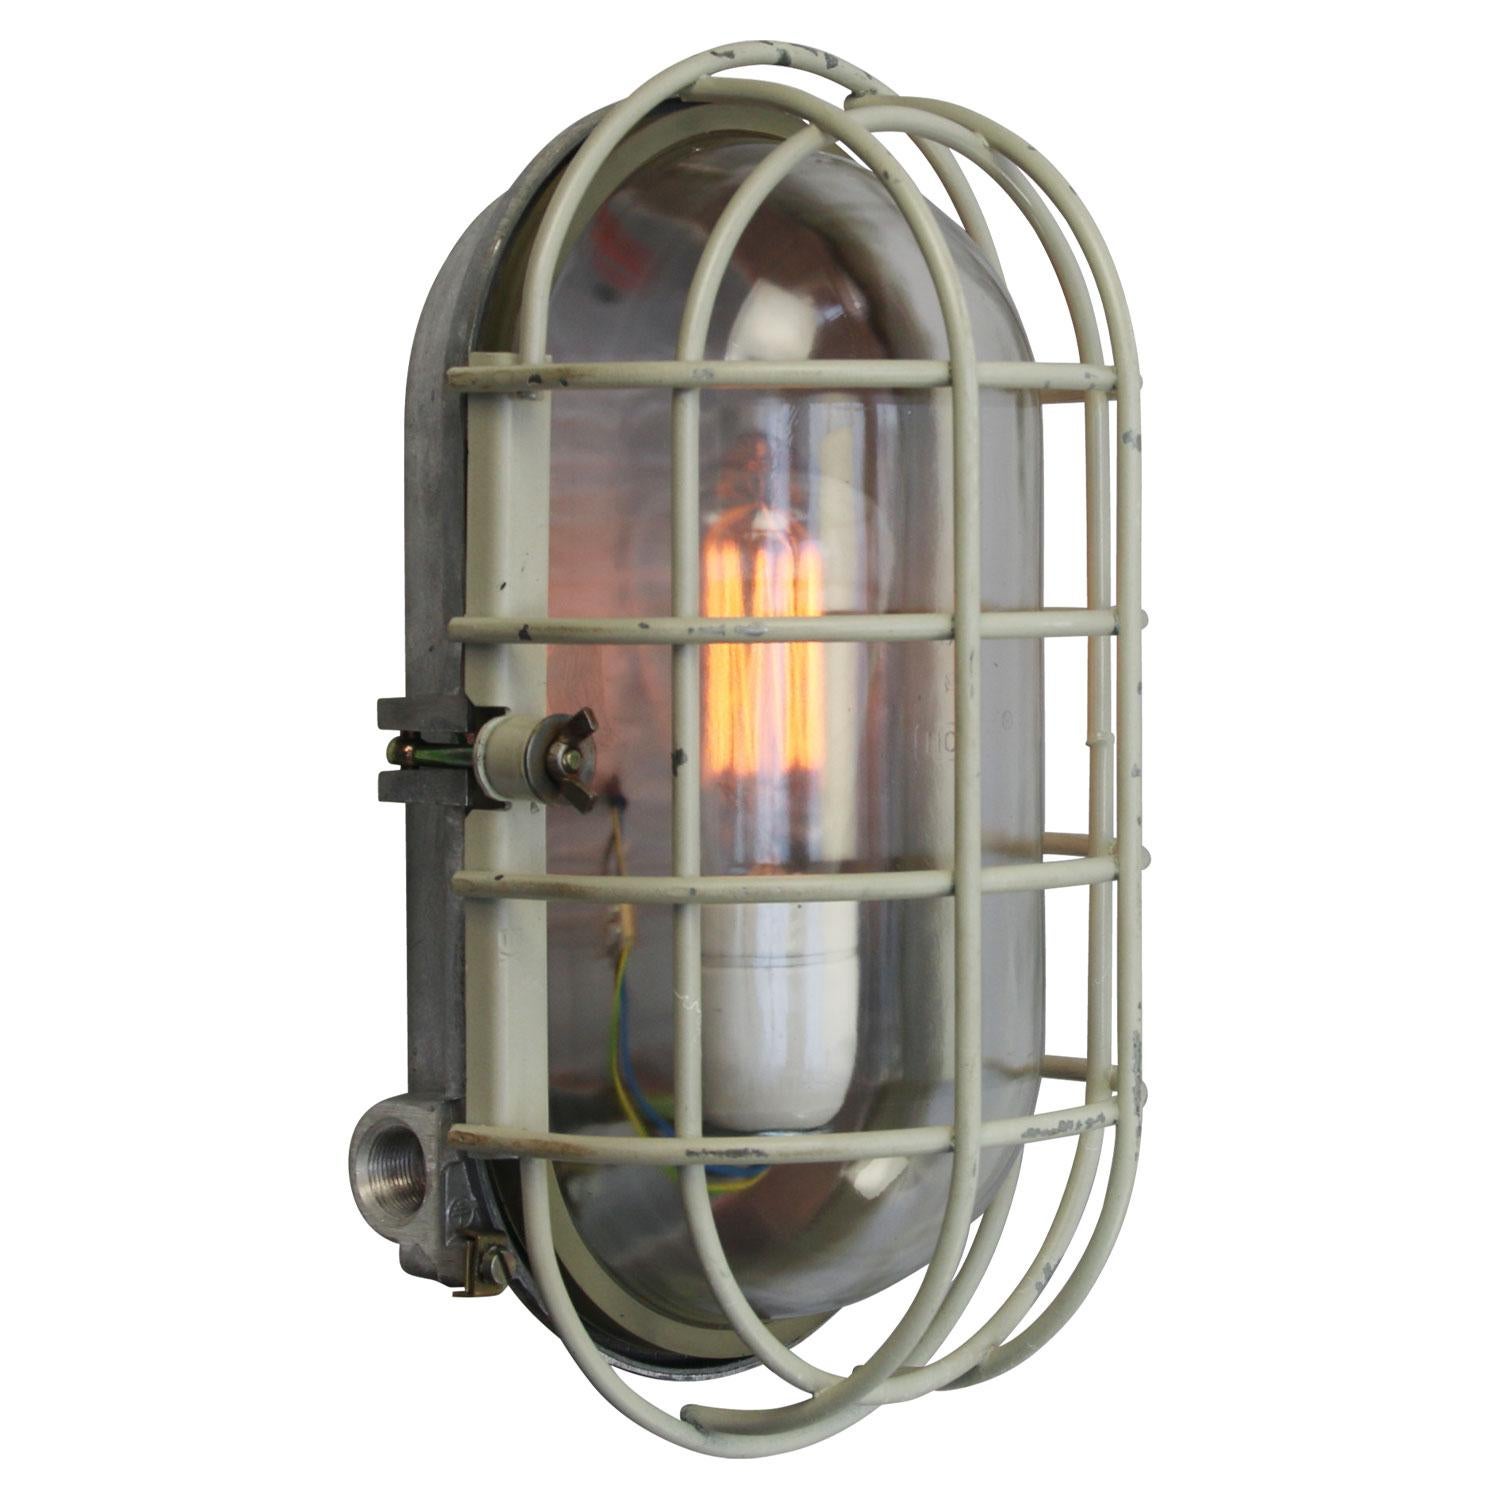 Industrial wall or ceiling lamp
cast aluminum, clear glass

Weight: 3.30 kg / 7.3 lb

Priced per individual item. All lamps have been made suitable by international standards for incandescent light bulbs, energy-efficient and LED bulbs. E26/E27